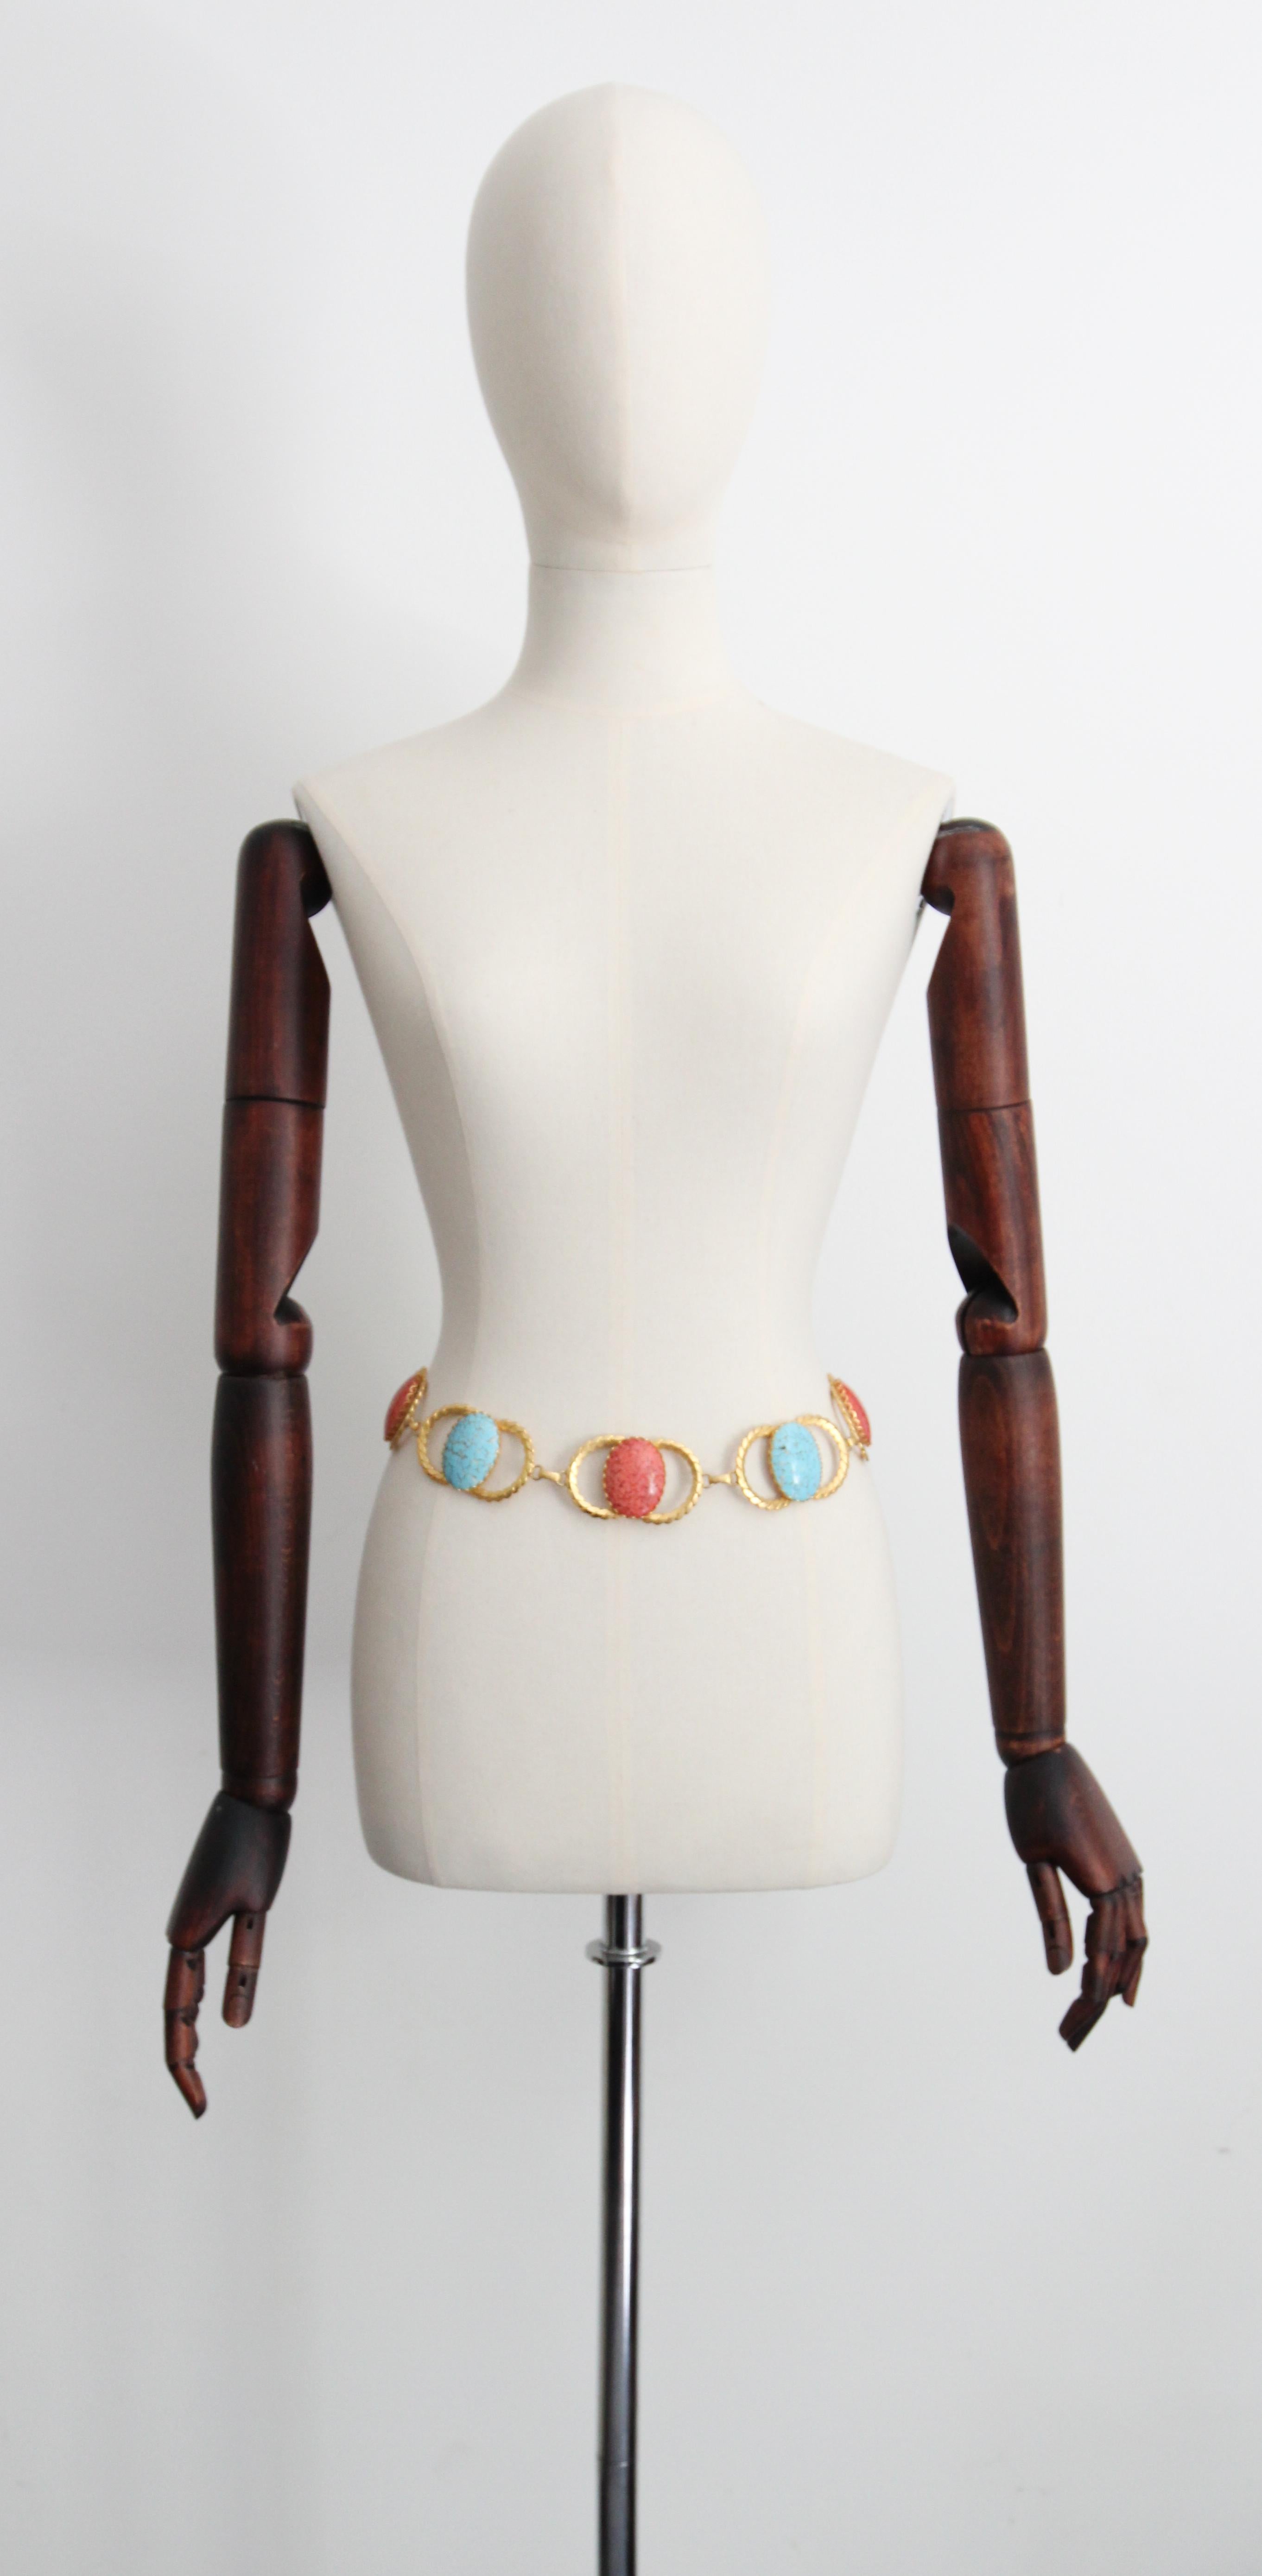 This iconic 1970's belt, made up of interlocking gold metal circles, embellished with central glass cabochons in alternating shades of marbled coral and marbled turquoise, set in petal shaped claw casings, and linked together with engraved loops,